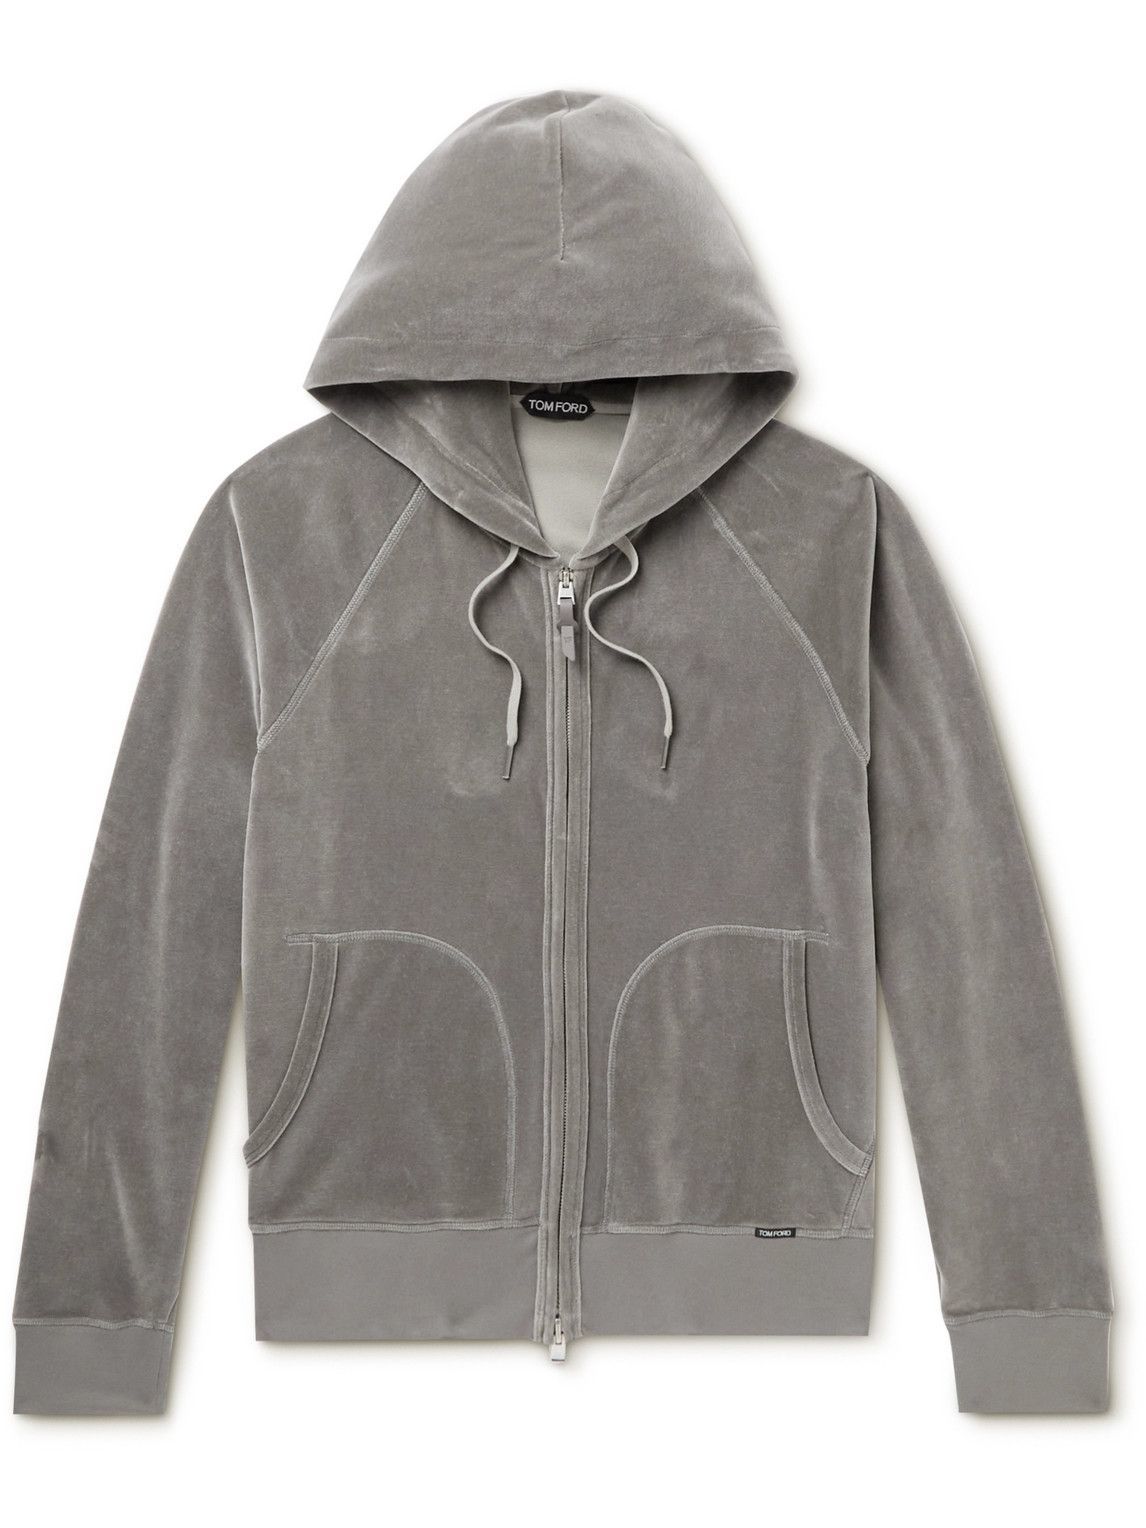 TOM FORD - Cotton-Blend Velour Zip-Up Hoodie - Gray TOM FORD